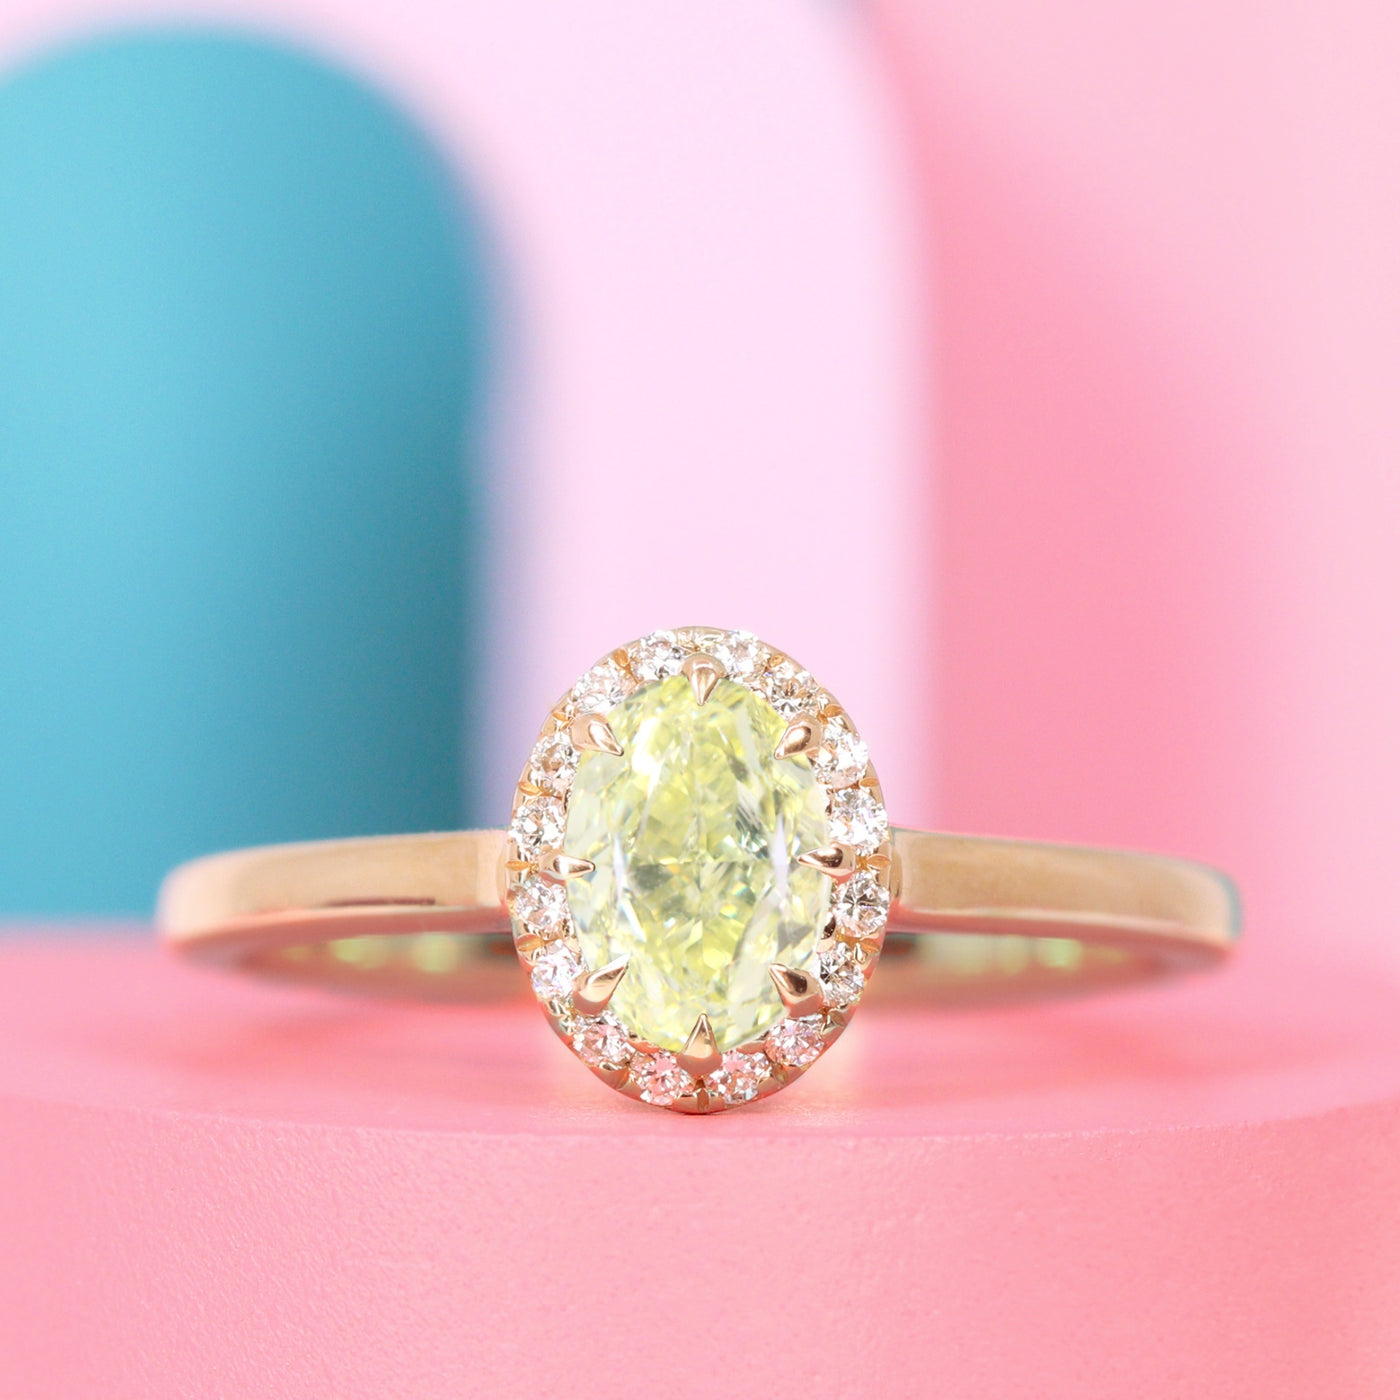 Charlotte - Oval Cut Yellow Diamond Ring with Hugging Halo - Made-to-Order